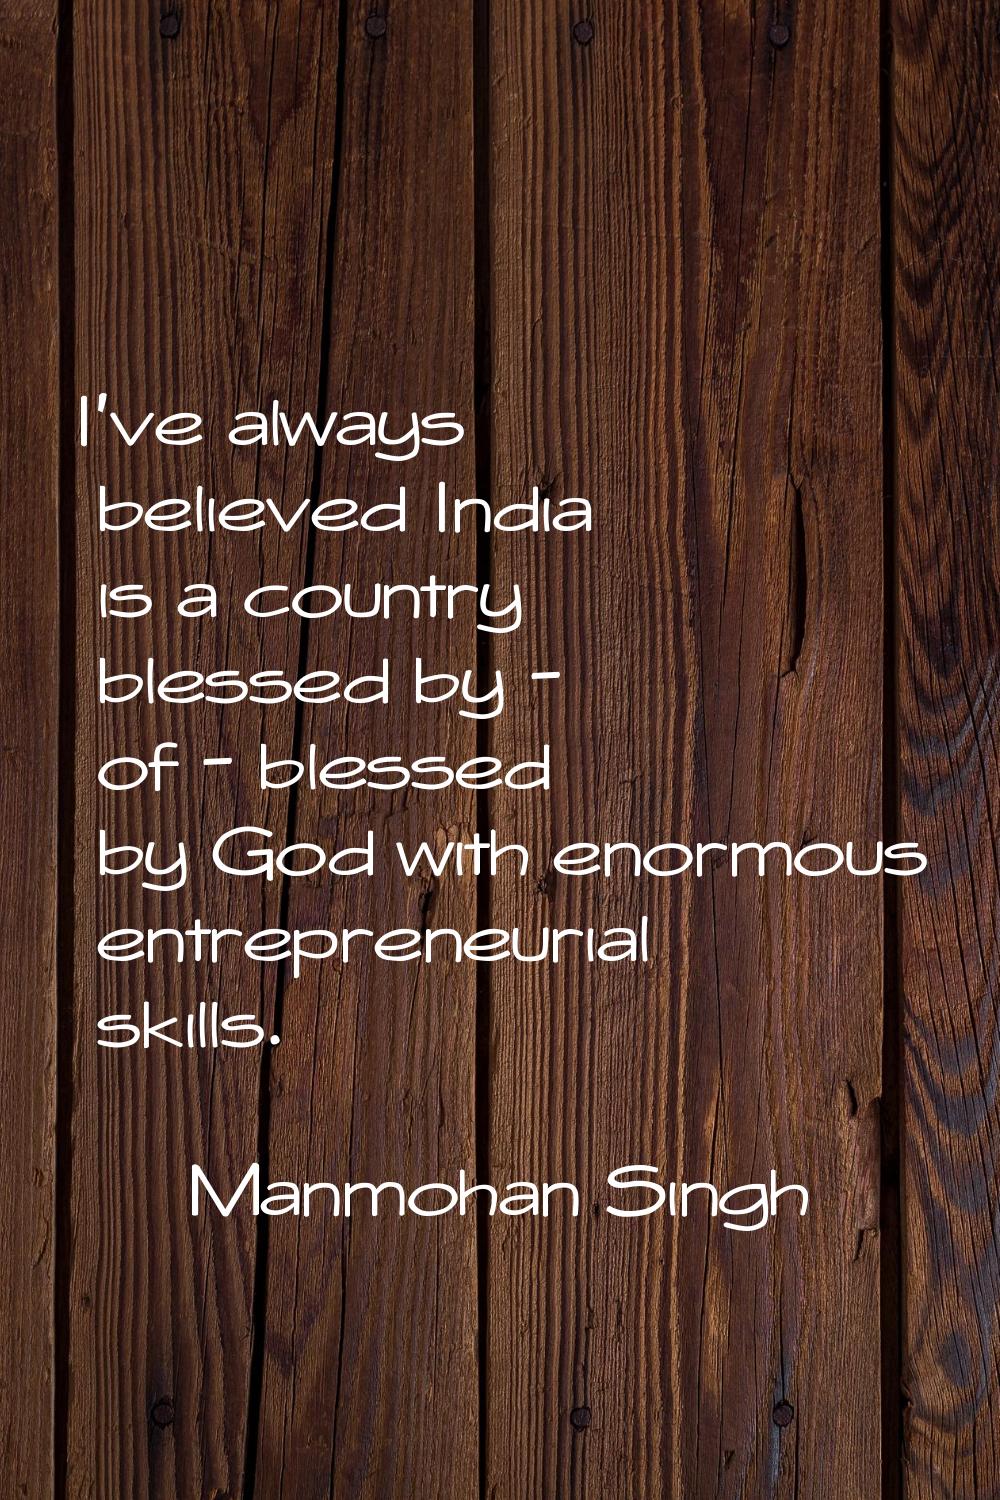 I've always believed India is a country blessed by - of - blessed by God with enormous entrepreneur